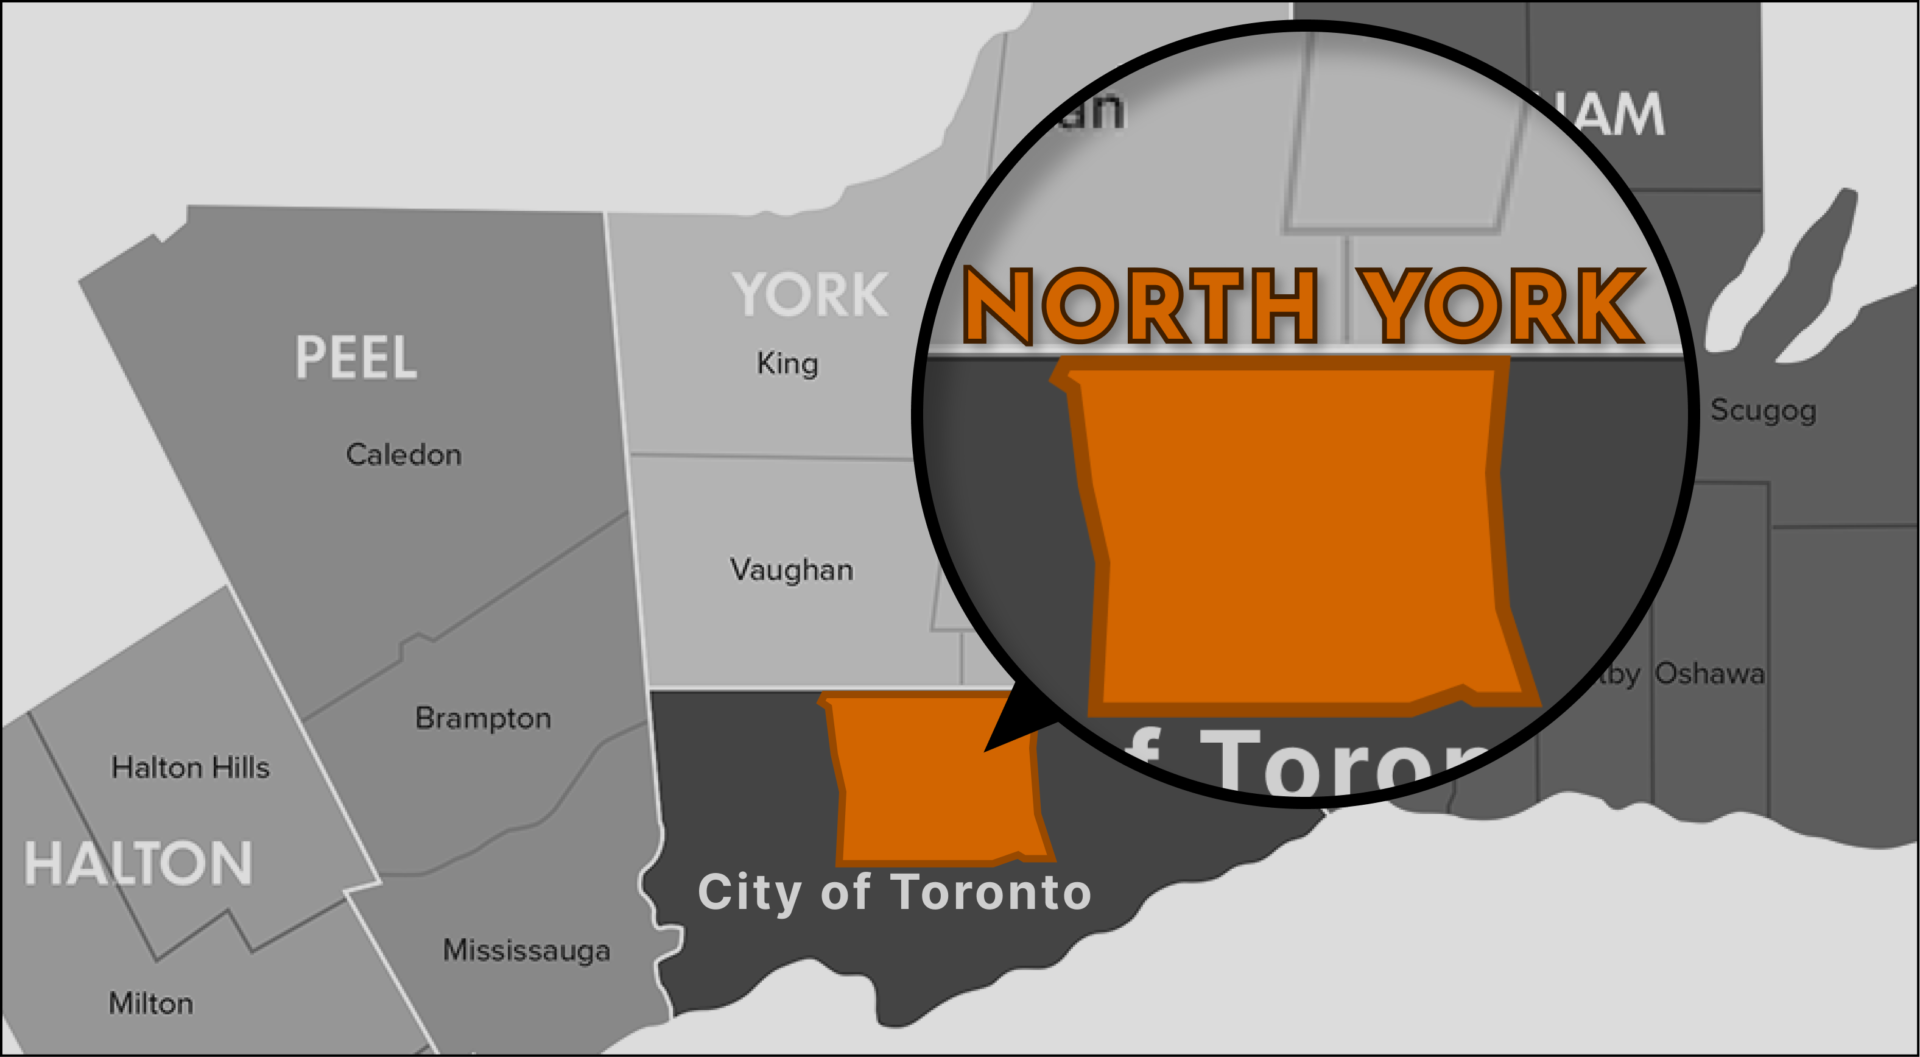 North York Map With a Magnified Portion